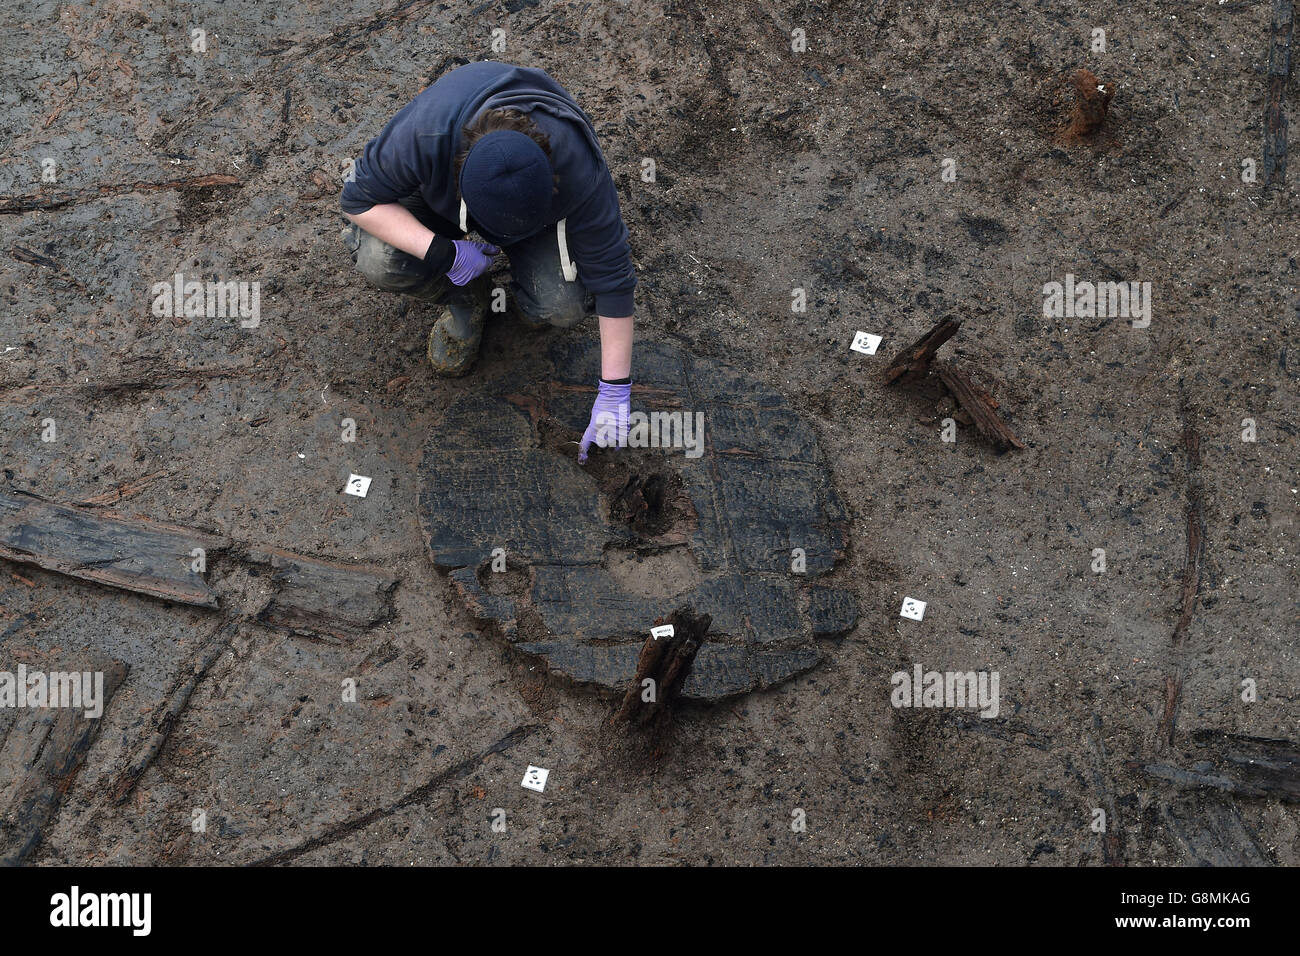 Archaeologists work to extract the earliest complete Bronze Age wheel found in Britain, dated 1100-800 BC, during the excavation of the Must Farm site near Peterborough in Cambridgeshire. Stock Photo